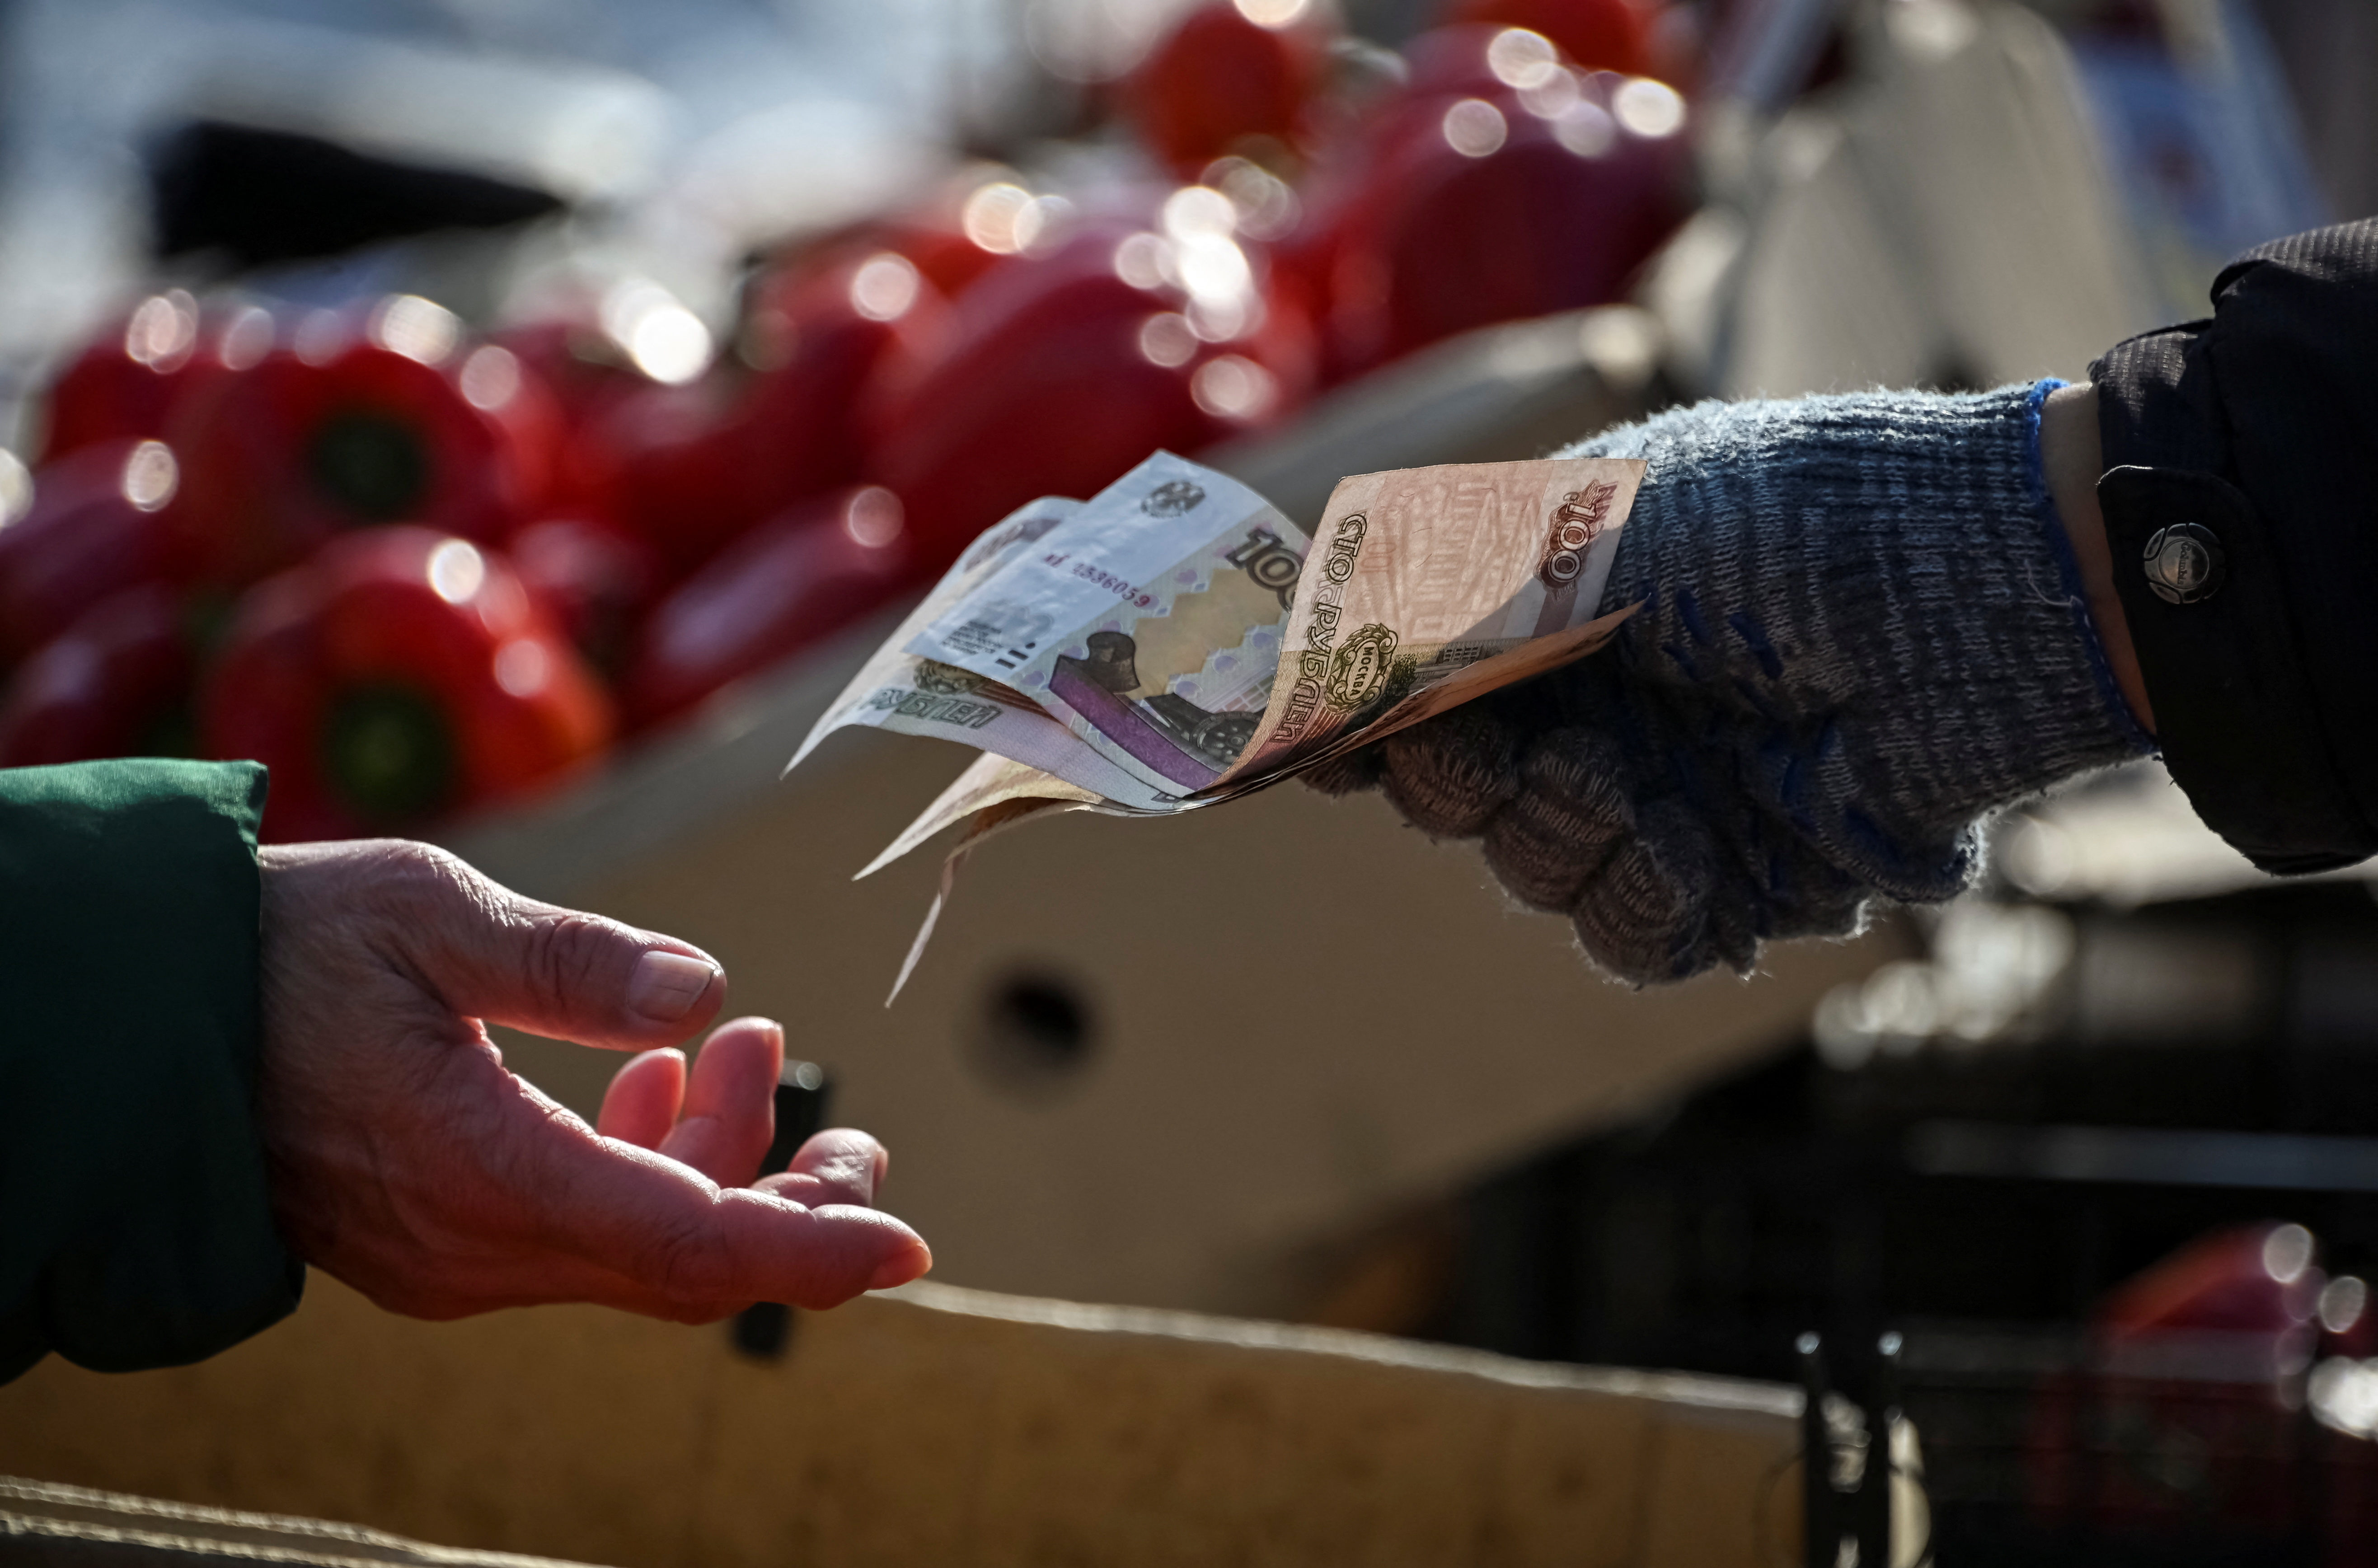 A vendor hands over Russian rouble banknotes to a customer at a street market in Omsk